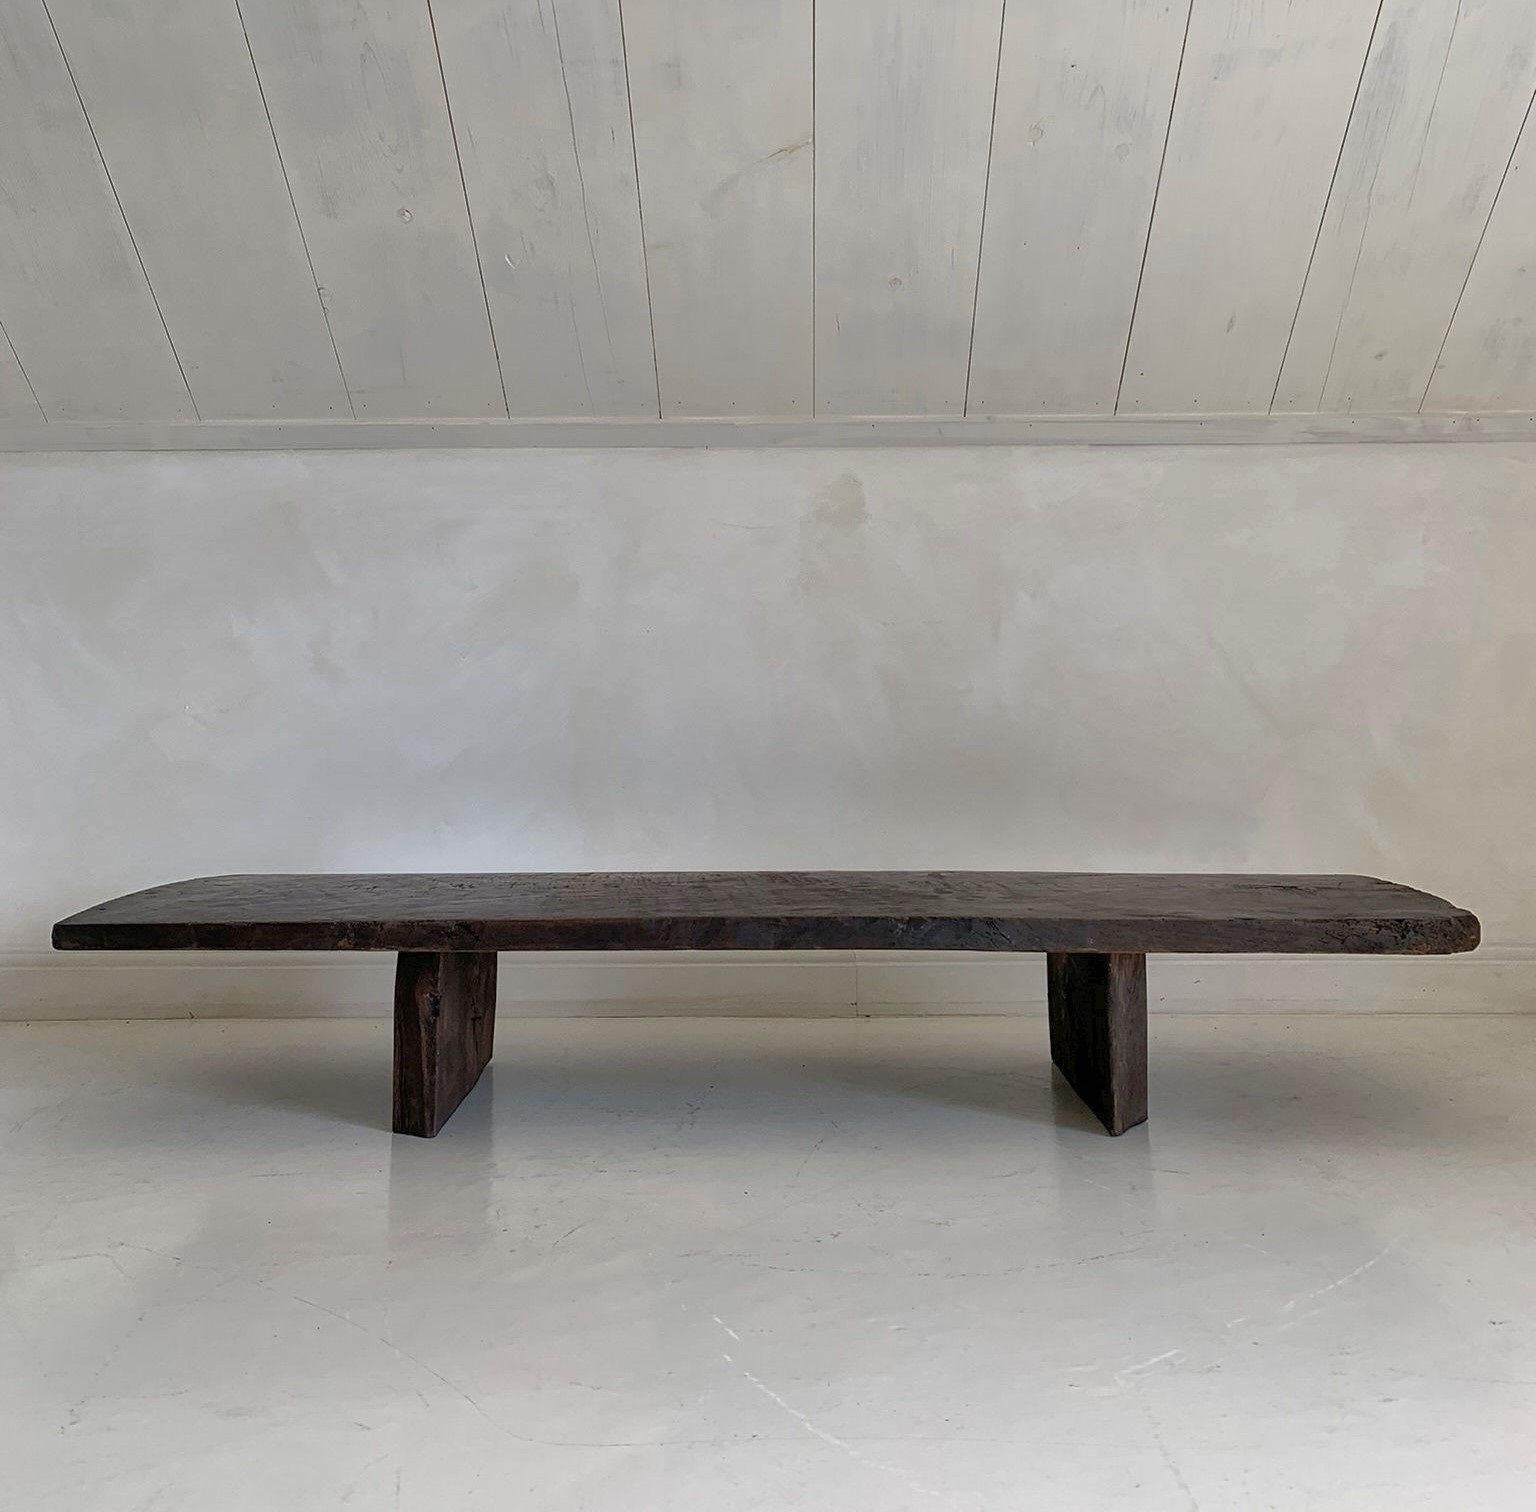 This coffeetable was made in our workshop starting from a one slab 19th century chestnut top from the Pyrinee region. The bases were made from reclaimed slabs of old oak.